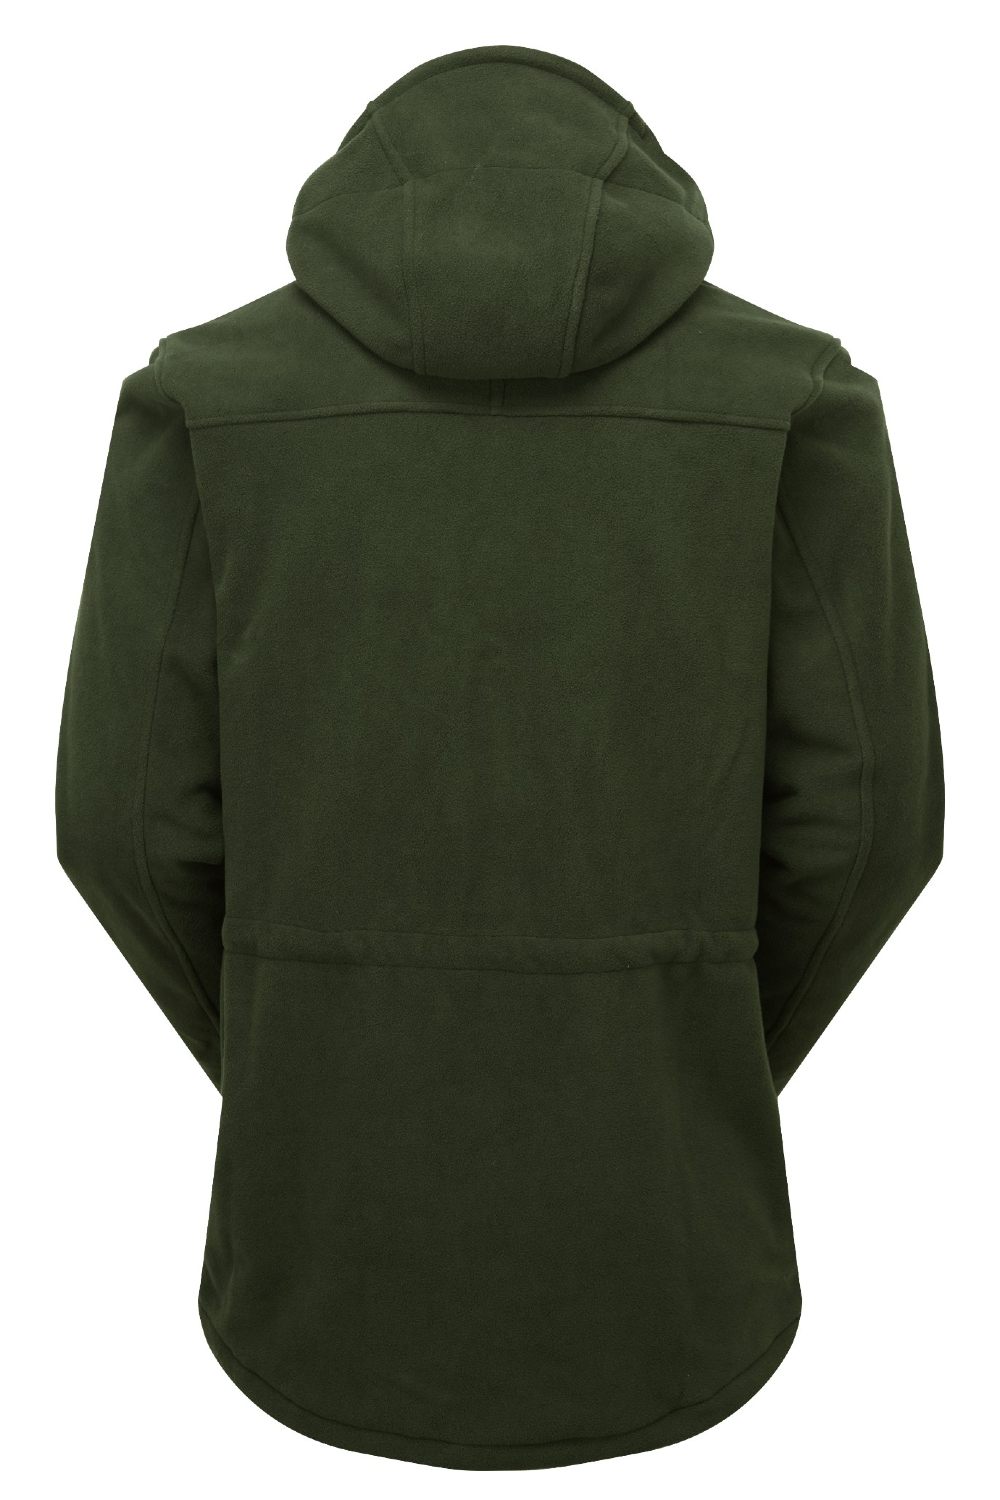 Ridgeline Grizzly III Smock in Olive